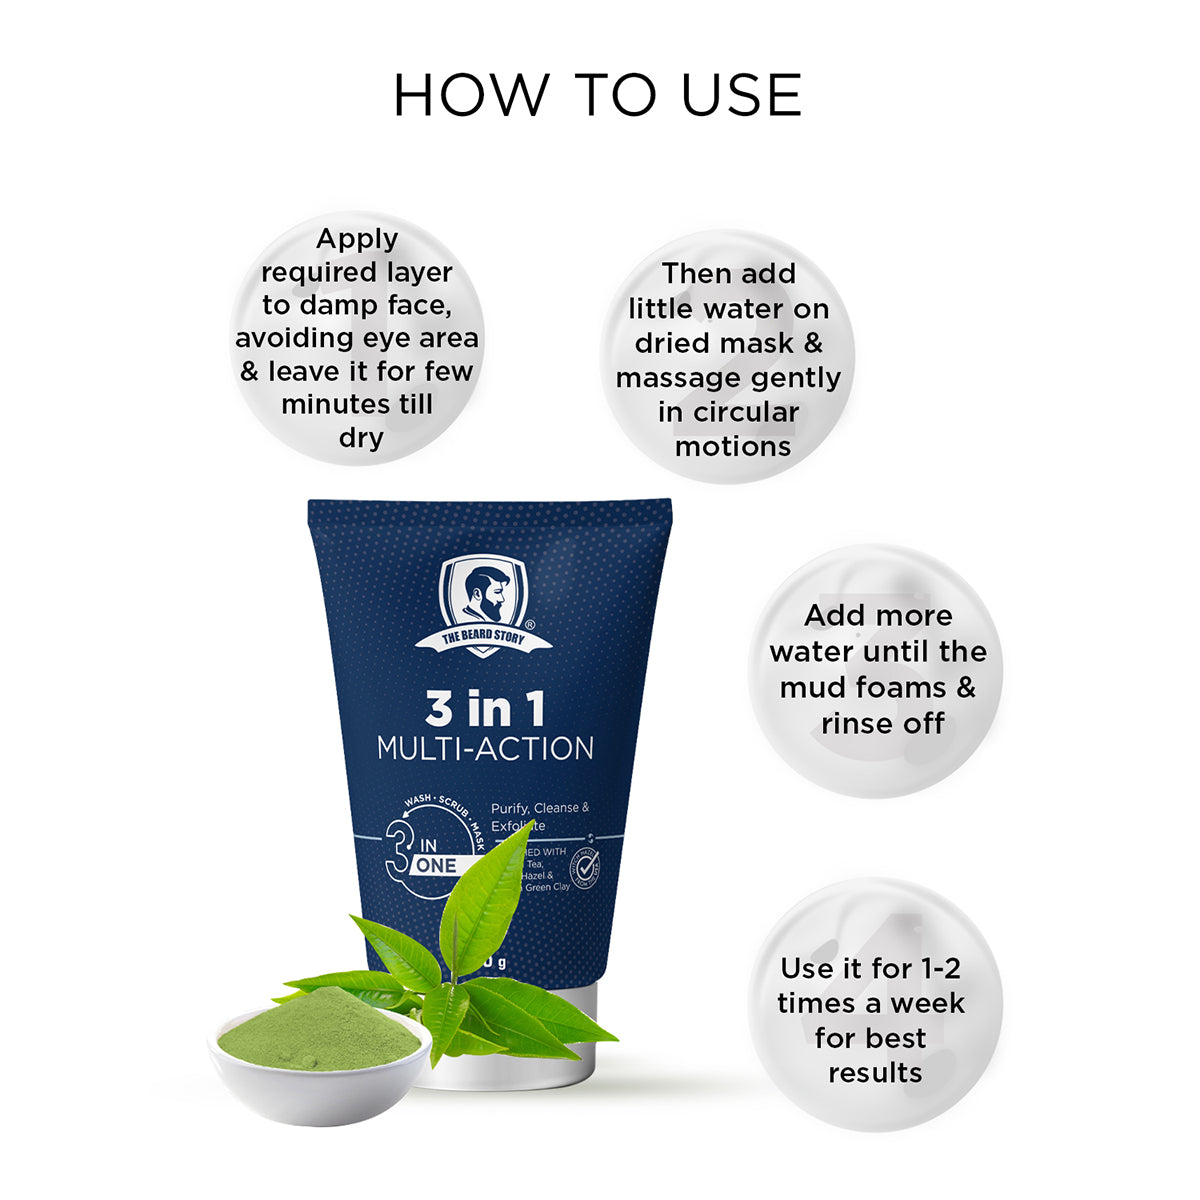 The Beard Story 3 in 1 Wash, Scrub & Mask | Enriched with Matcha Tea | Anti Pollution | 100g